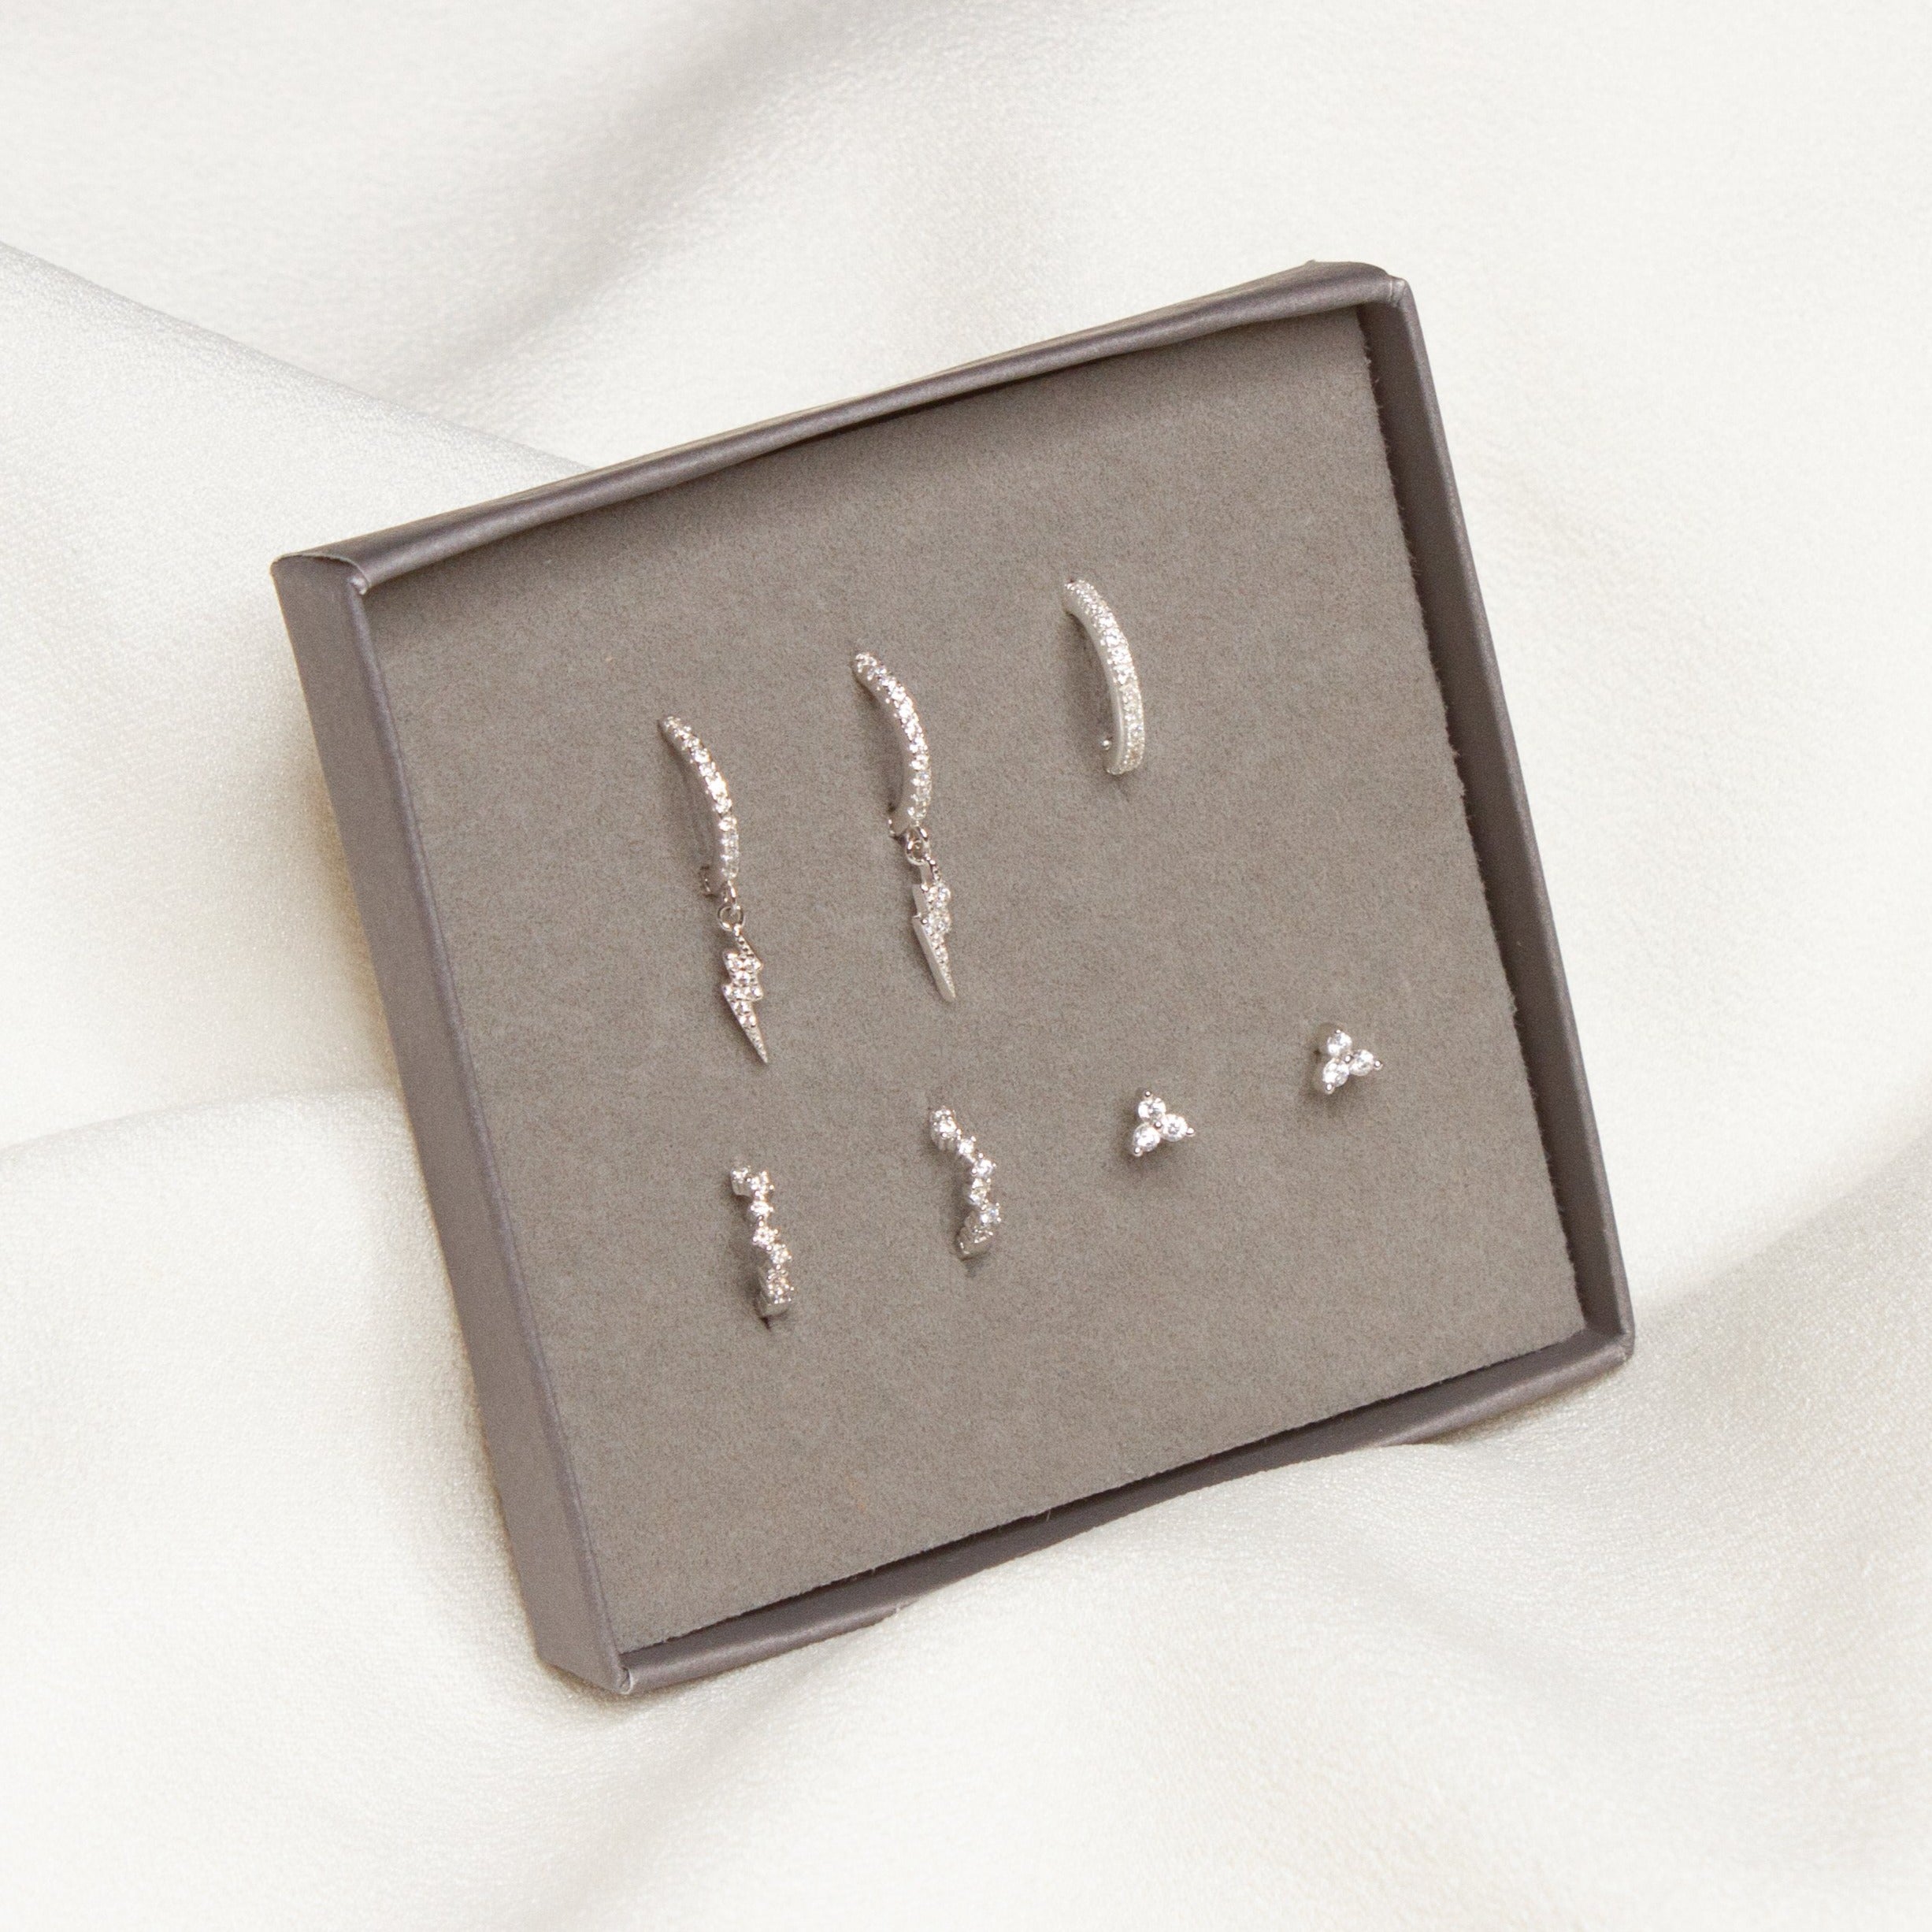 Ultimate Ear Party Stacking Set Silver